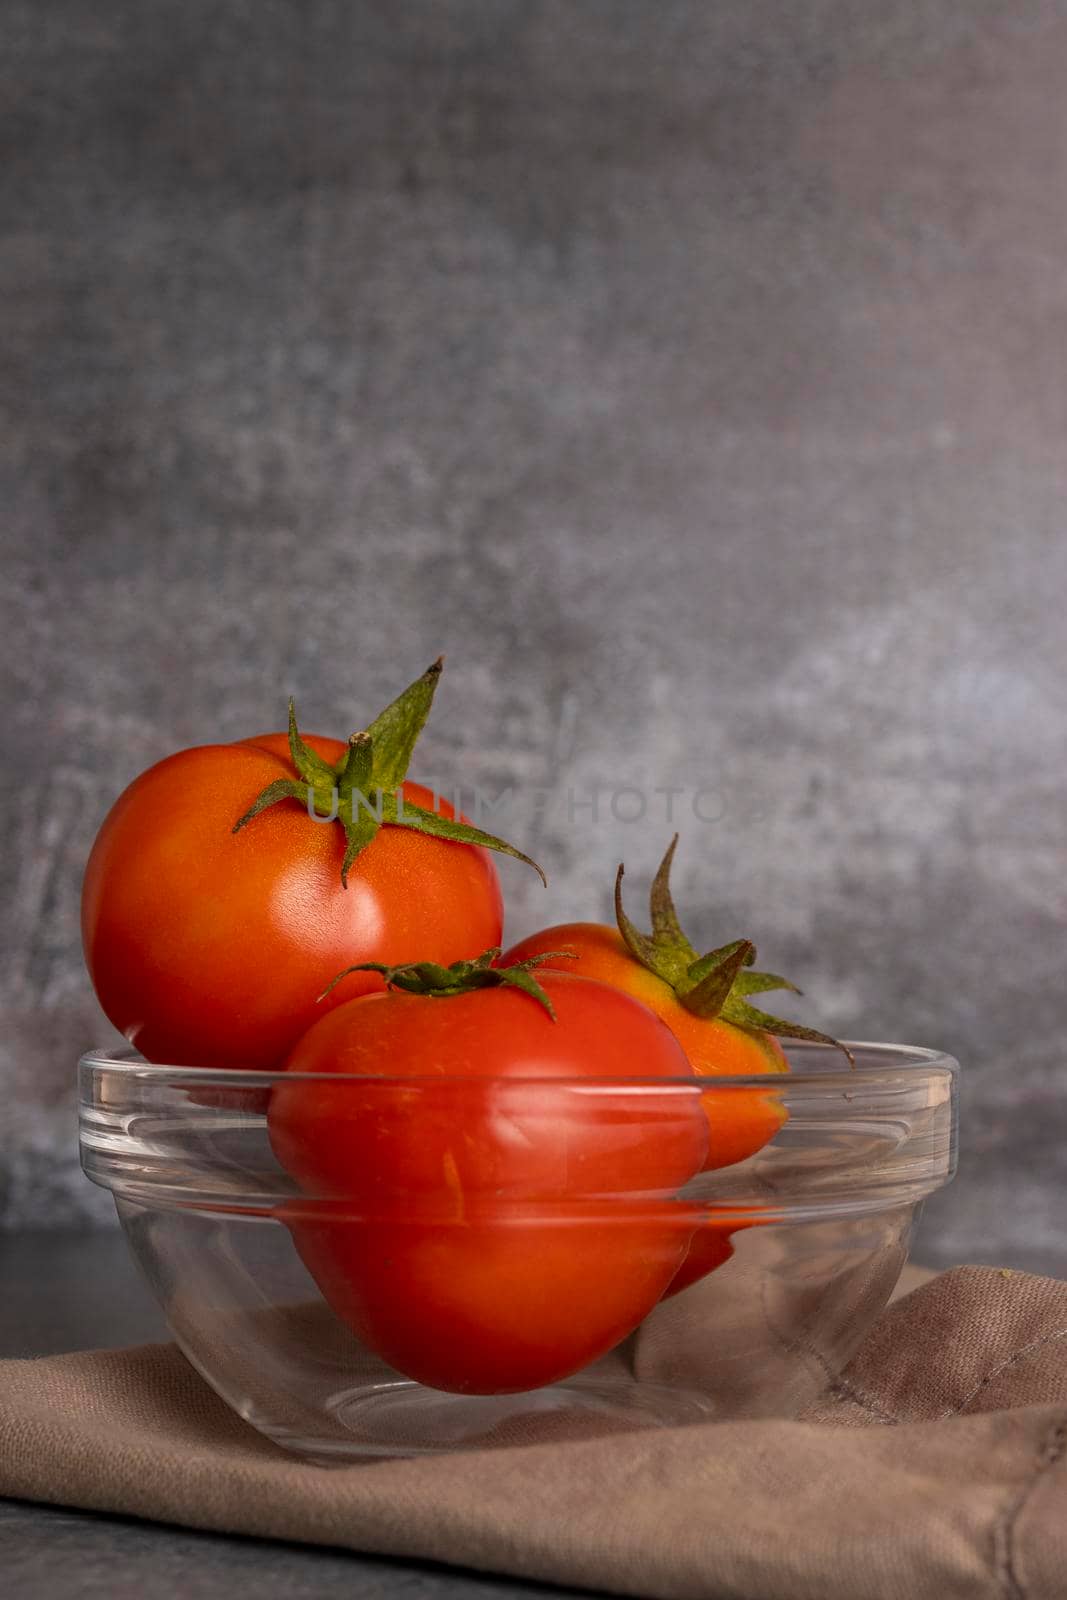 Tomatoes in salad inside a bowl on grayish background by eagg13